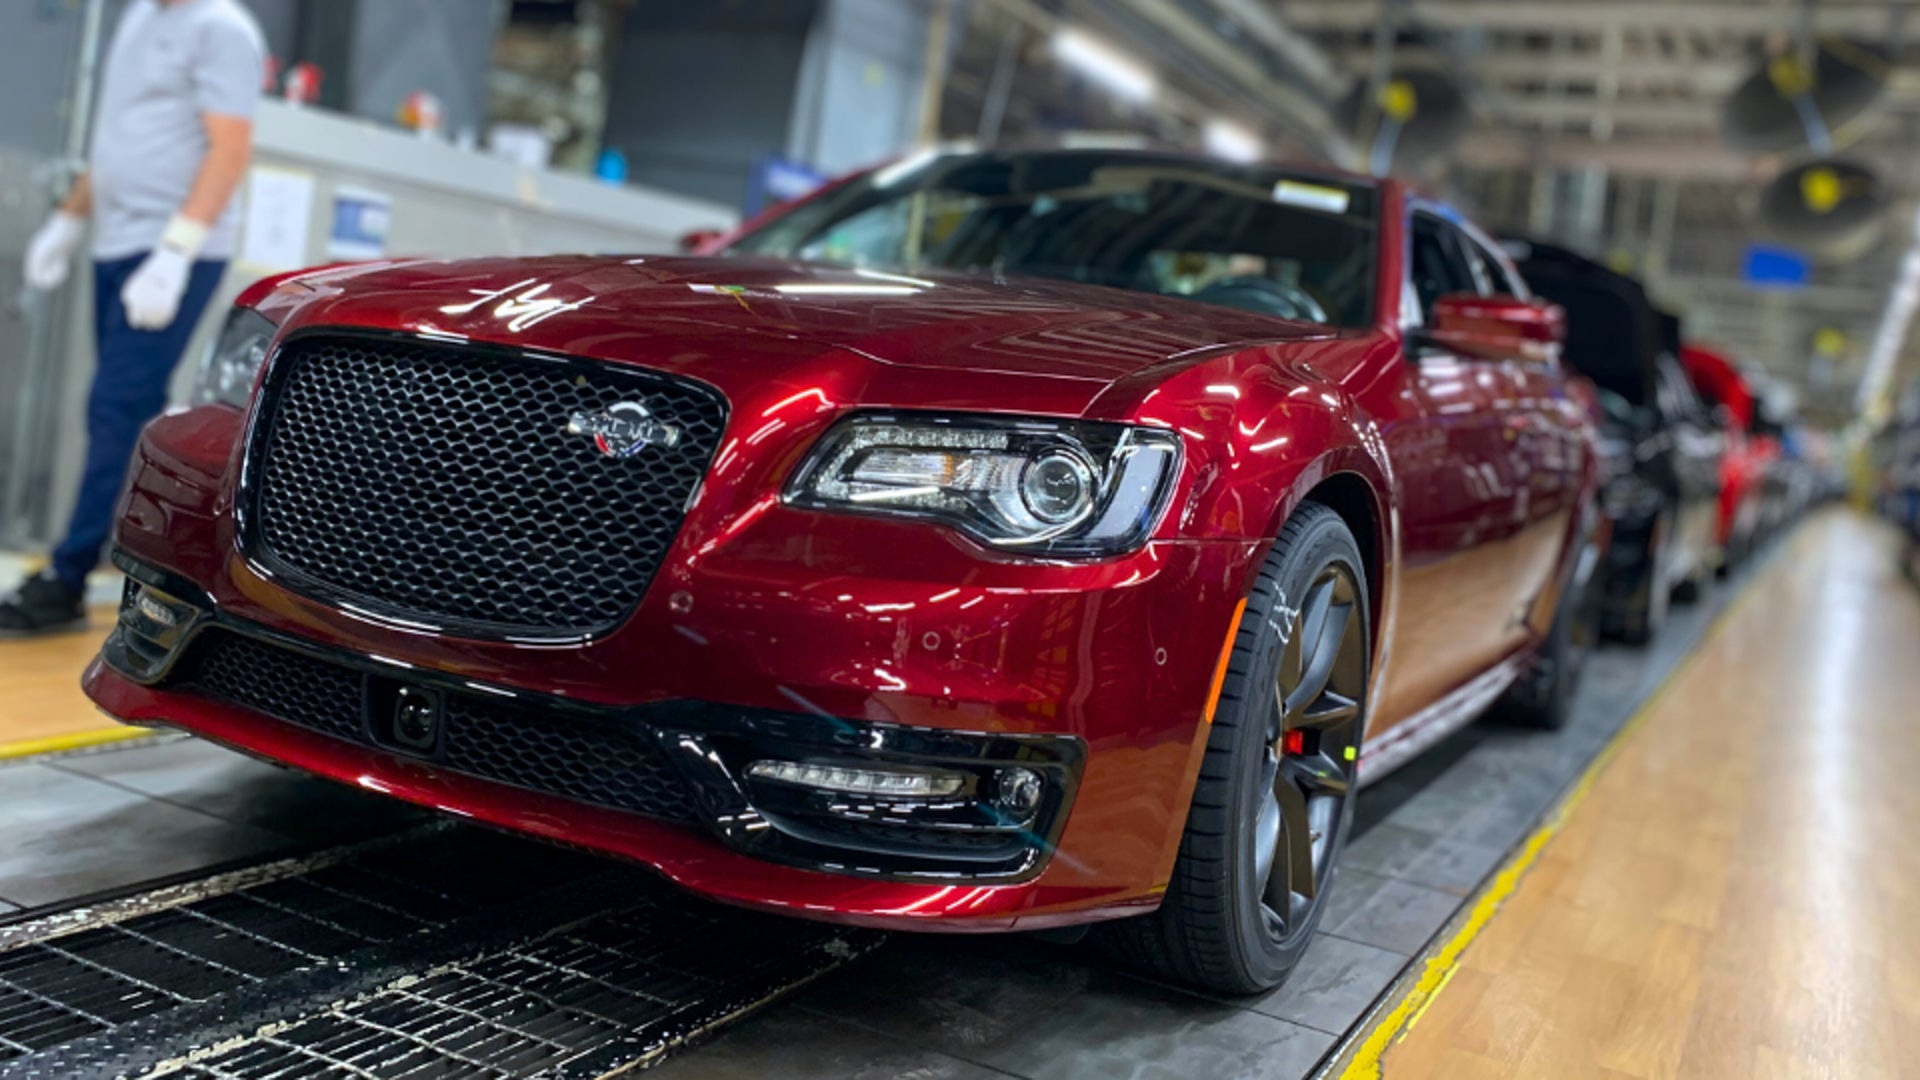 The most recent Chrysler 300C, equipped with a powerful Hemi engine, has just been produced.